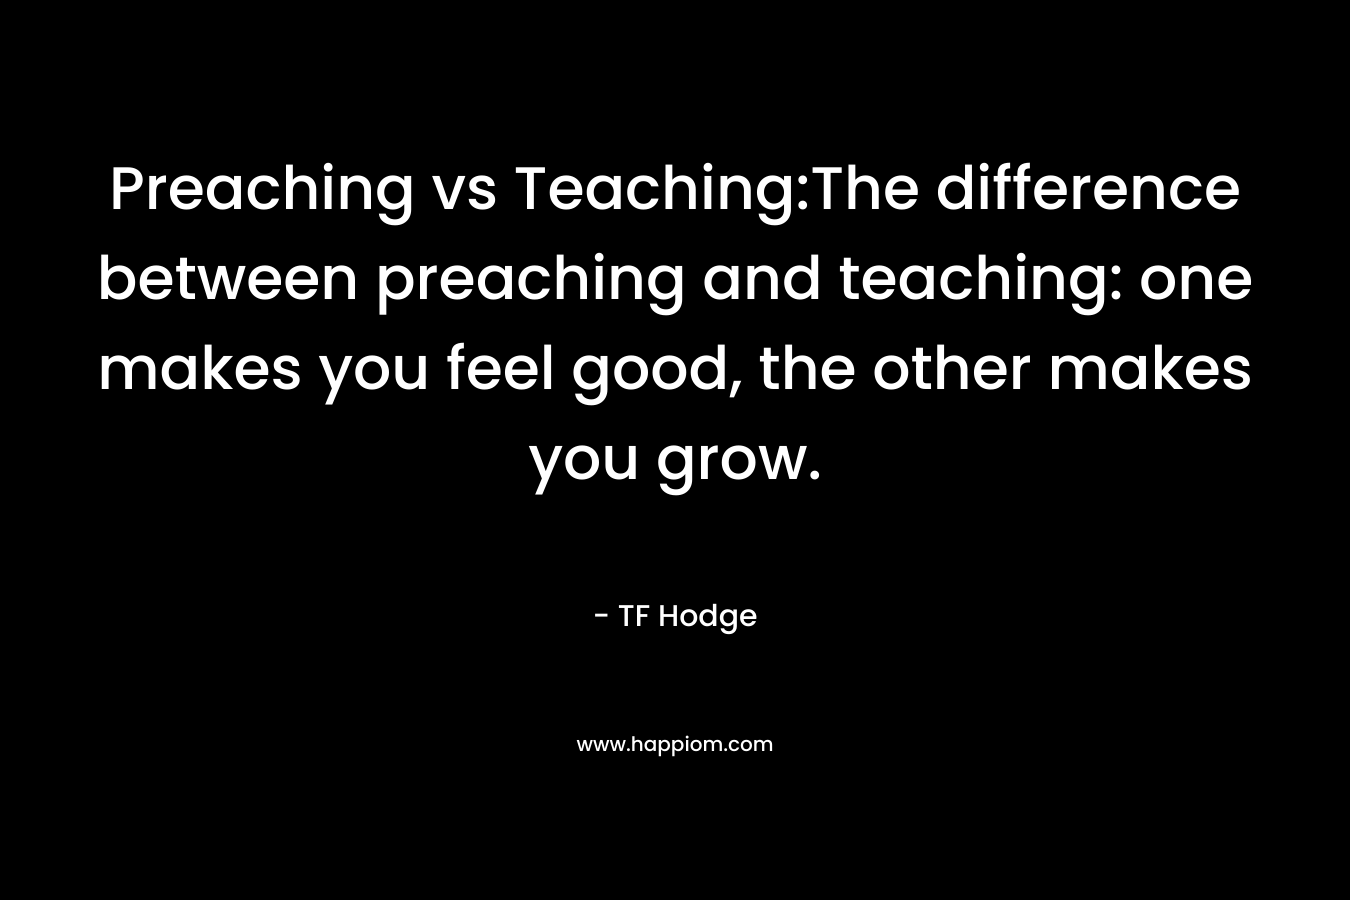 Preaching vs Teaching:The difference between preaching and teaching: one makes you feel good, the other makes you grow. – TF Hodge